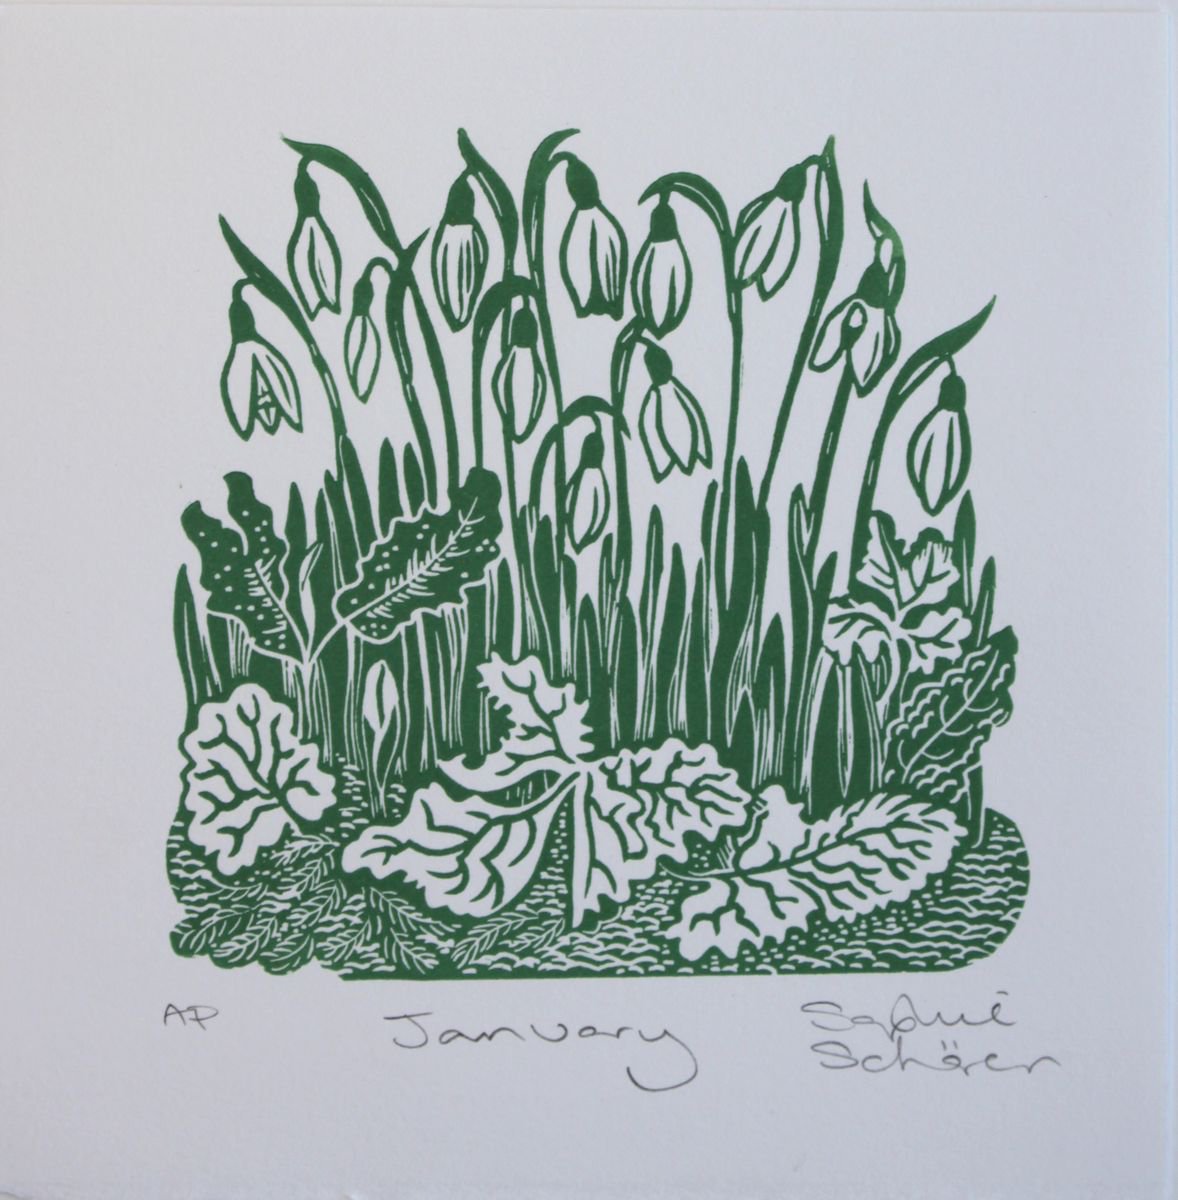 January Snowdrops by Sophie Scharer